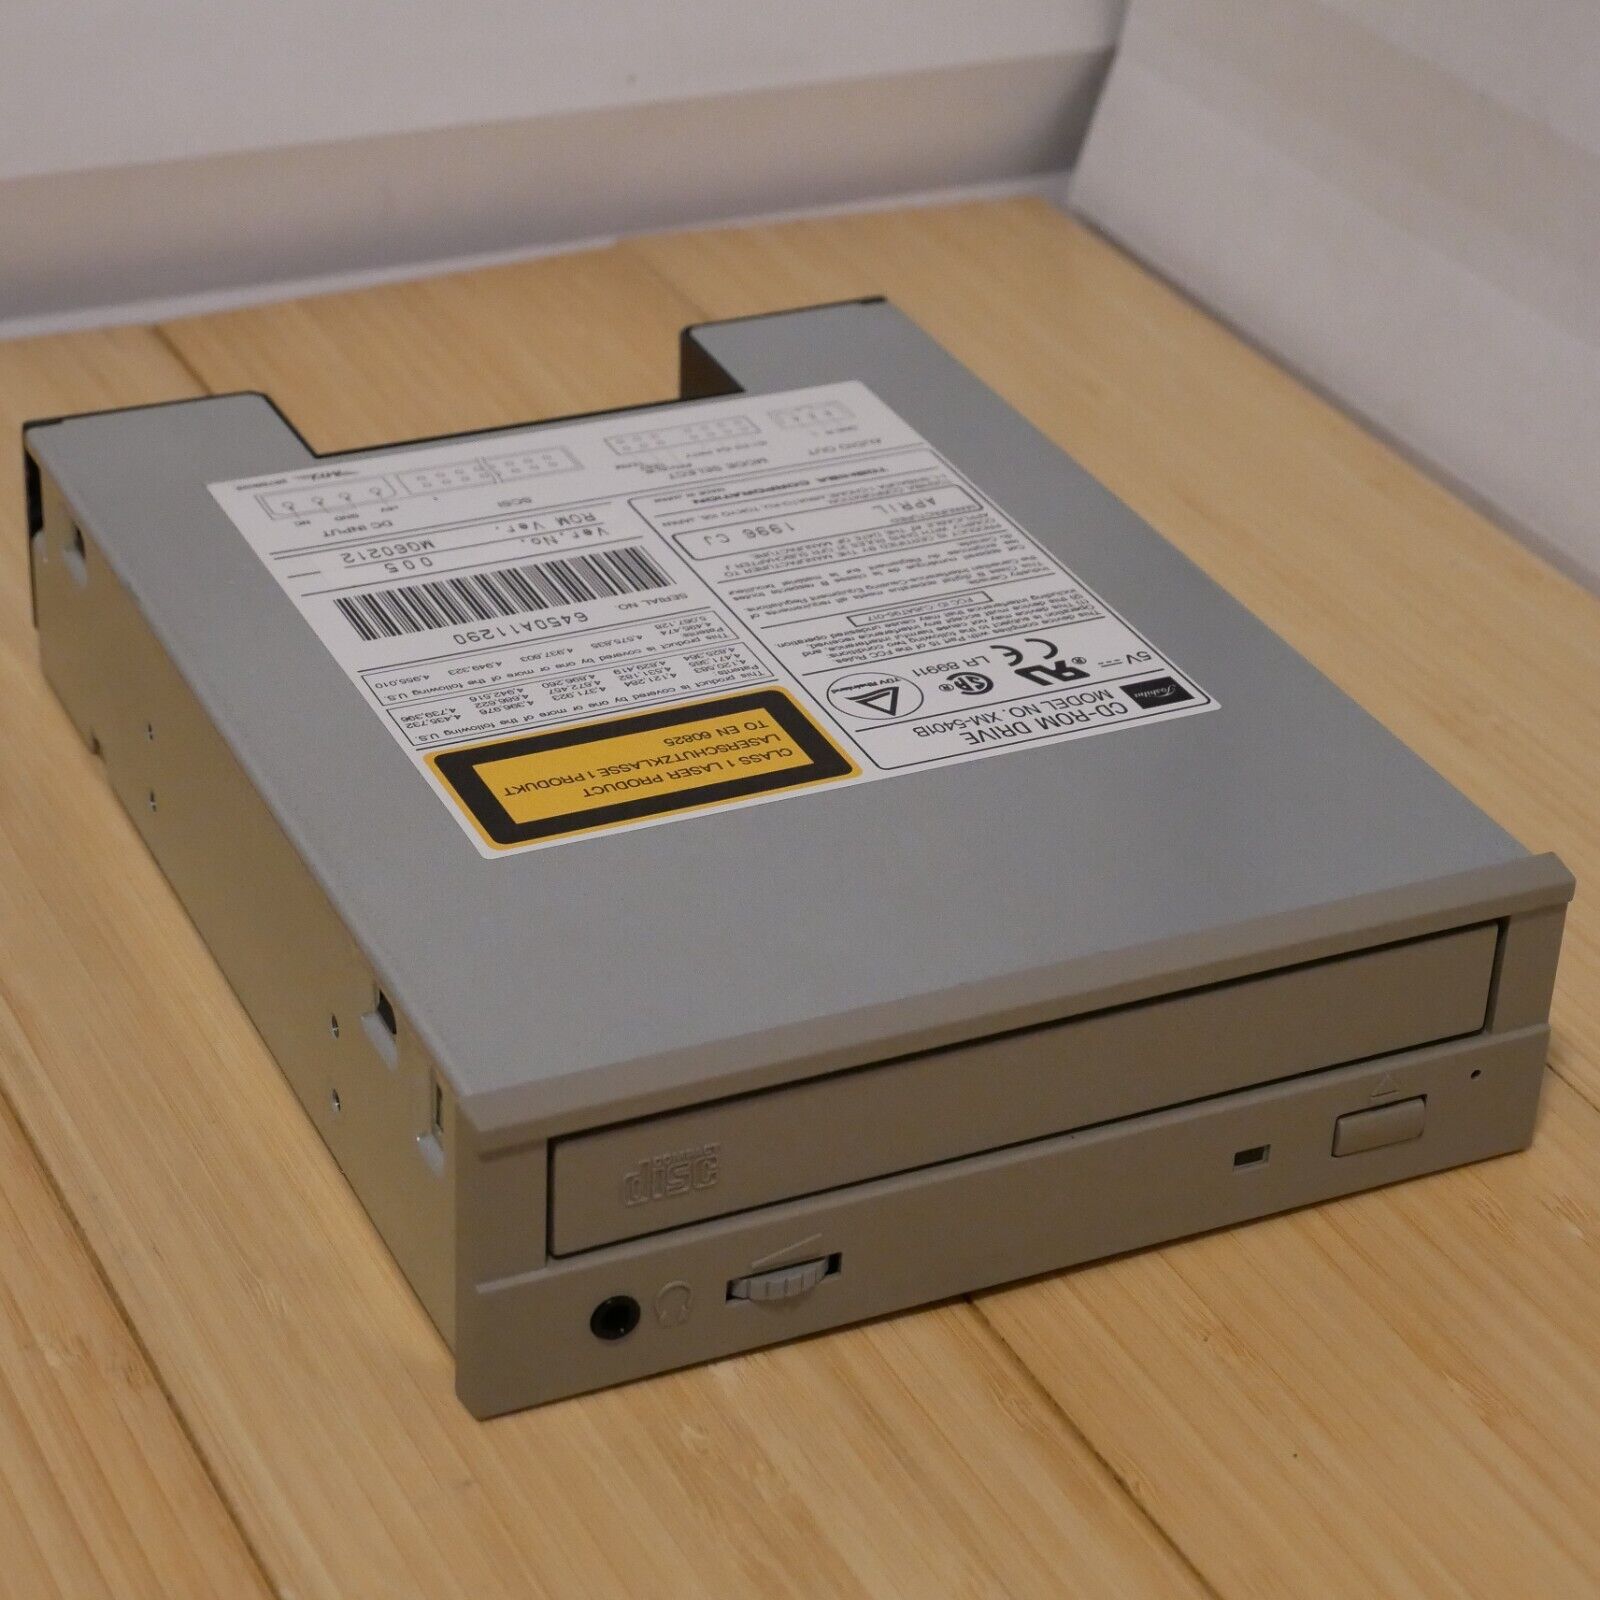 NOS Toshiba XM-5401B 5.25 in. SCSI 4x CD-ROM Drive - Tested & Working